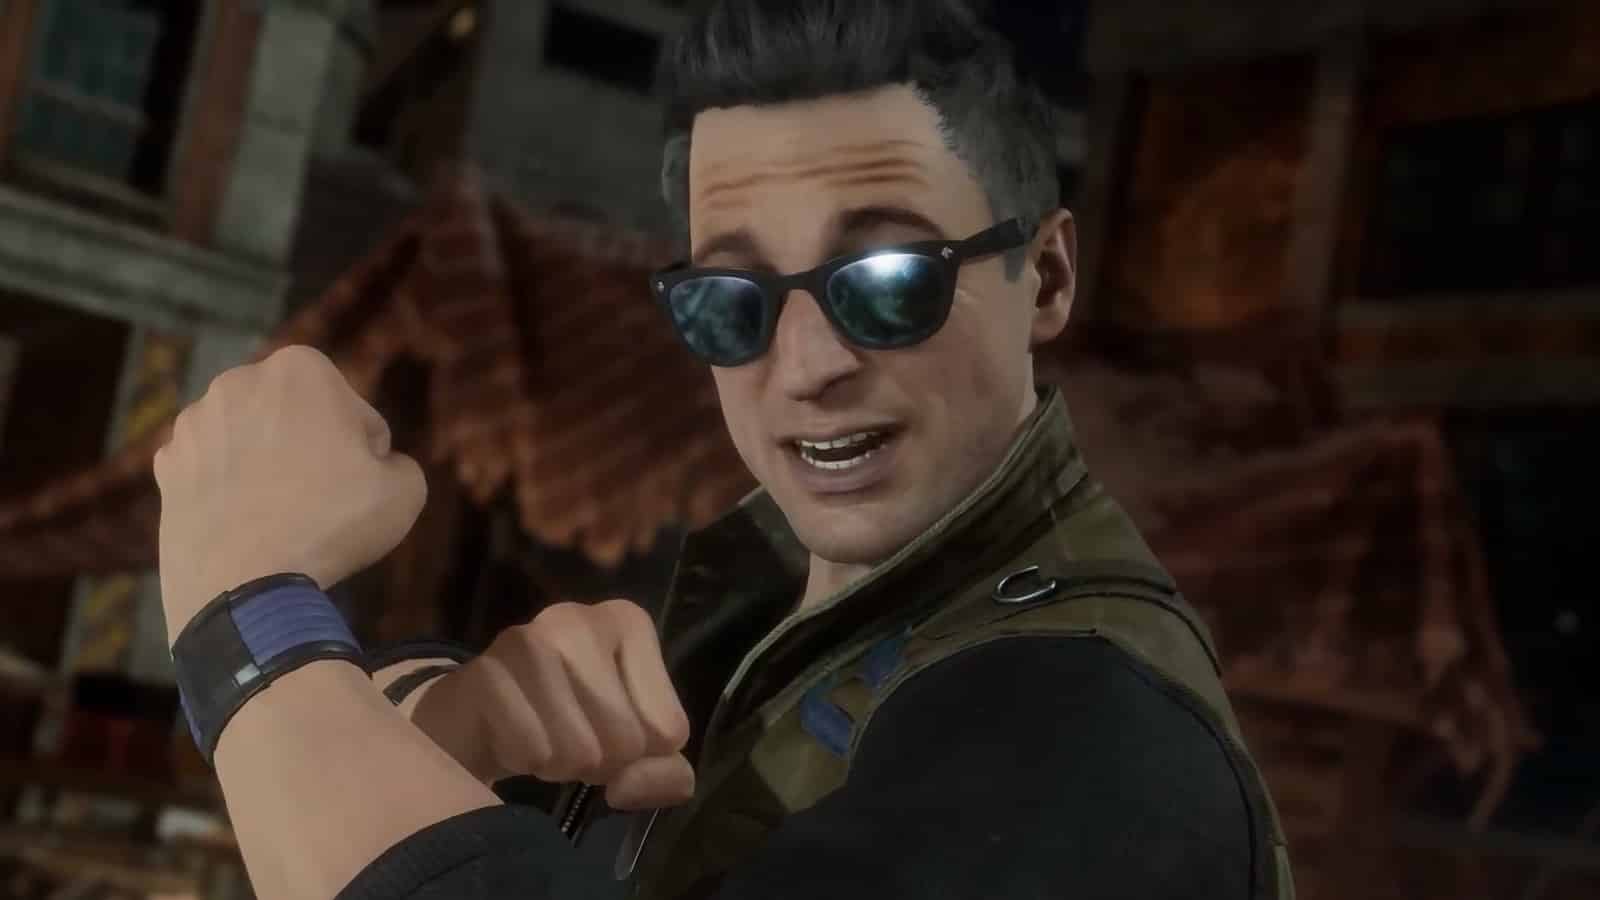 Johnny cage actor hints at mk12